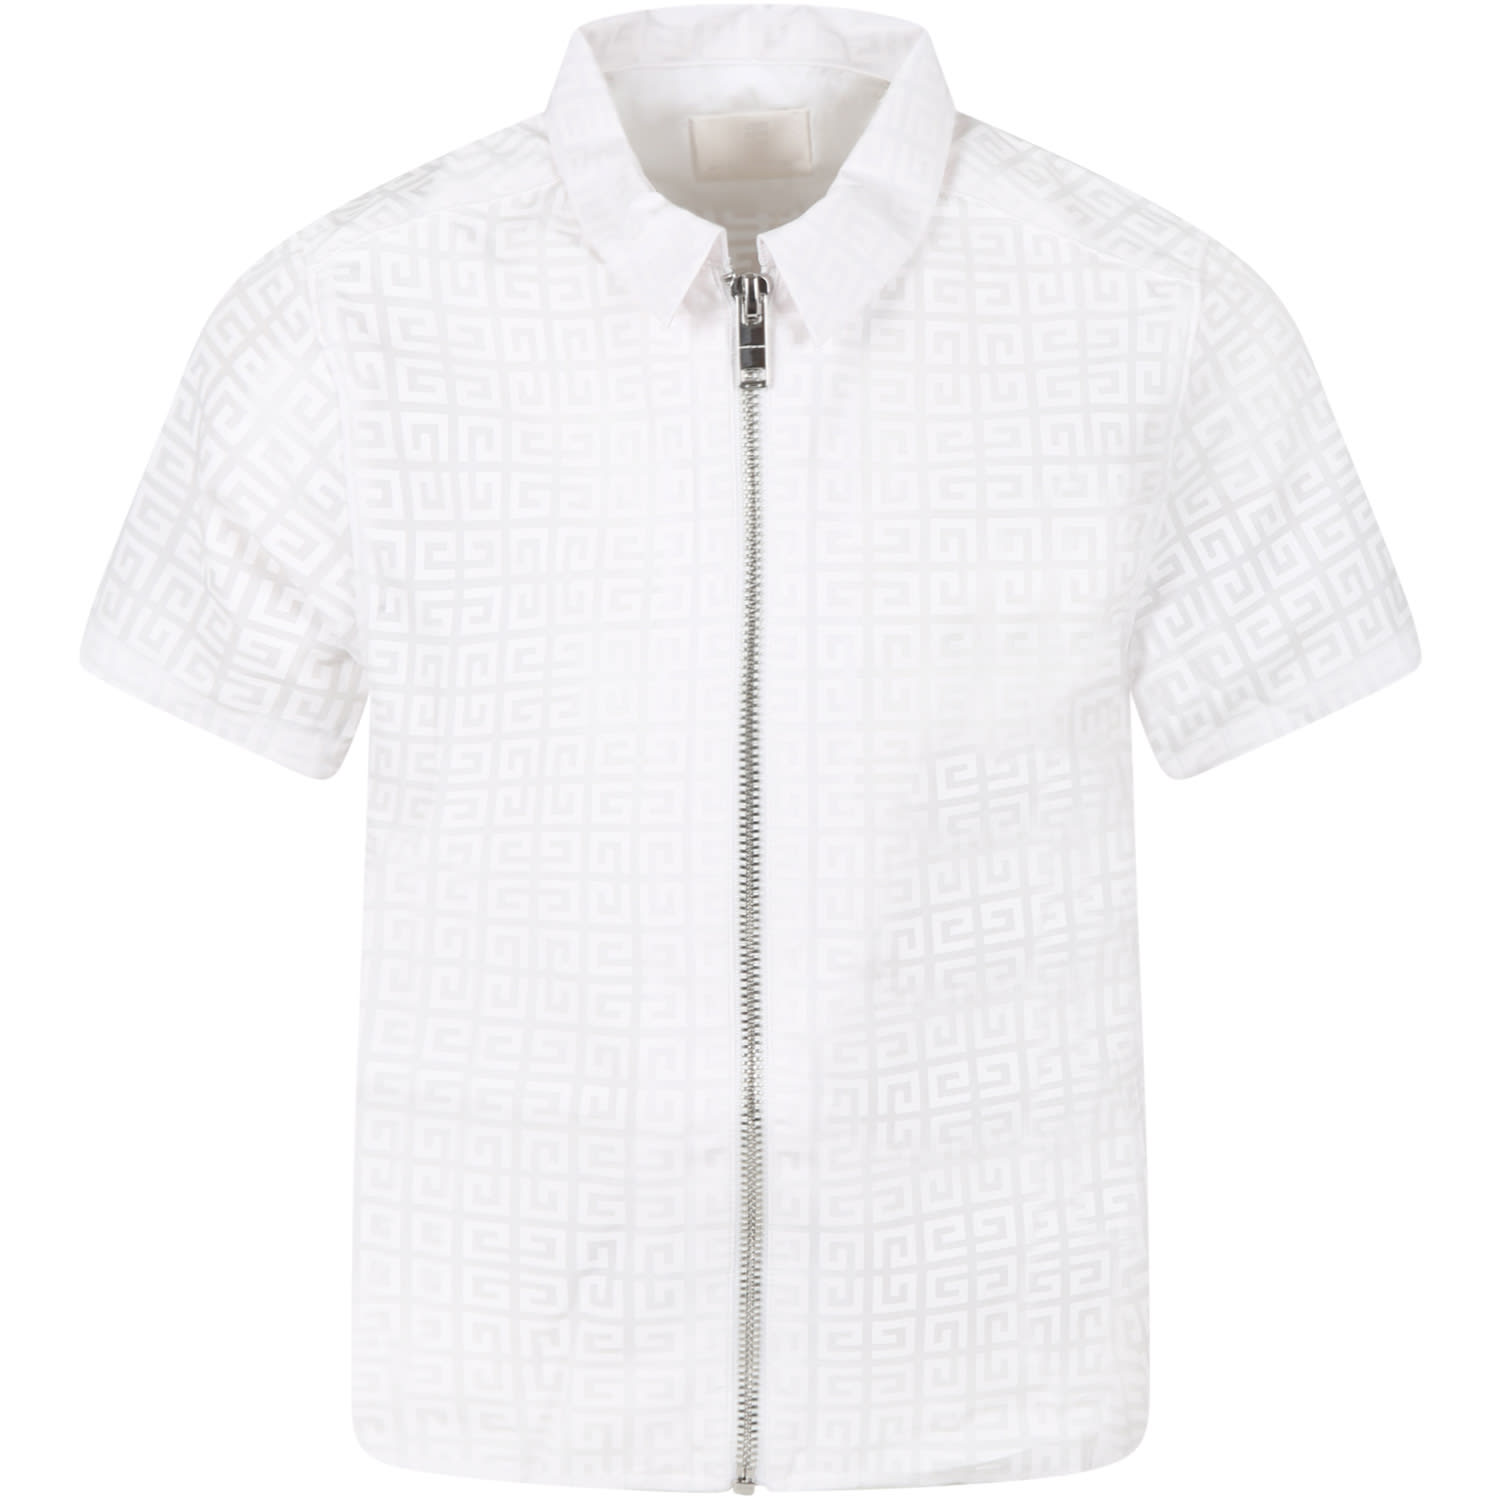 Givenchy White Shirt For Kids With Logos